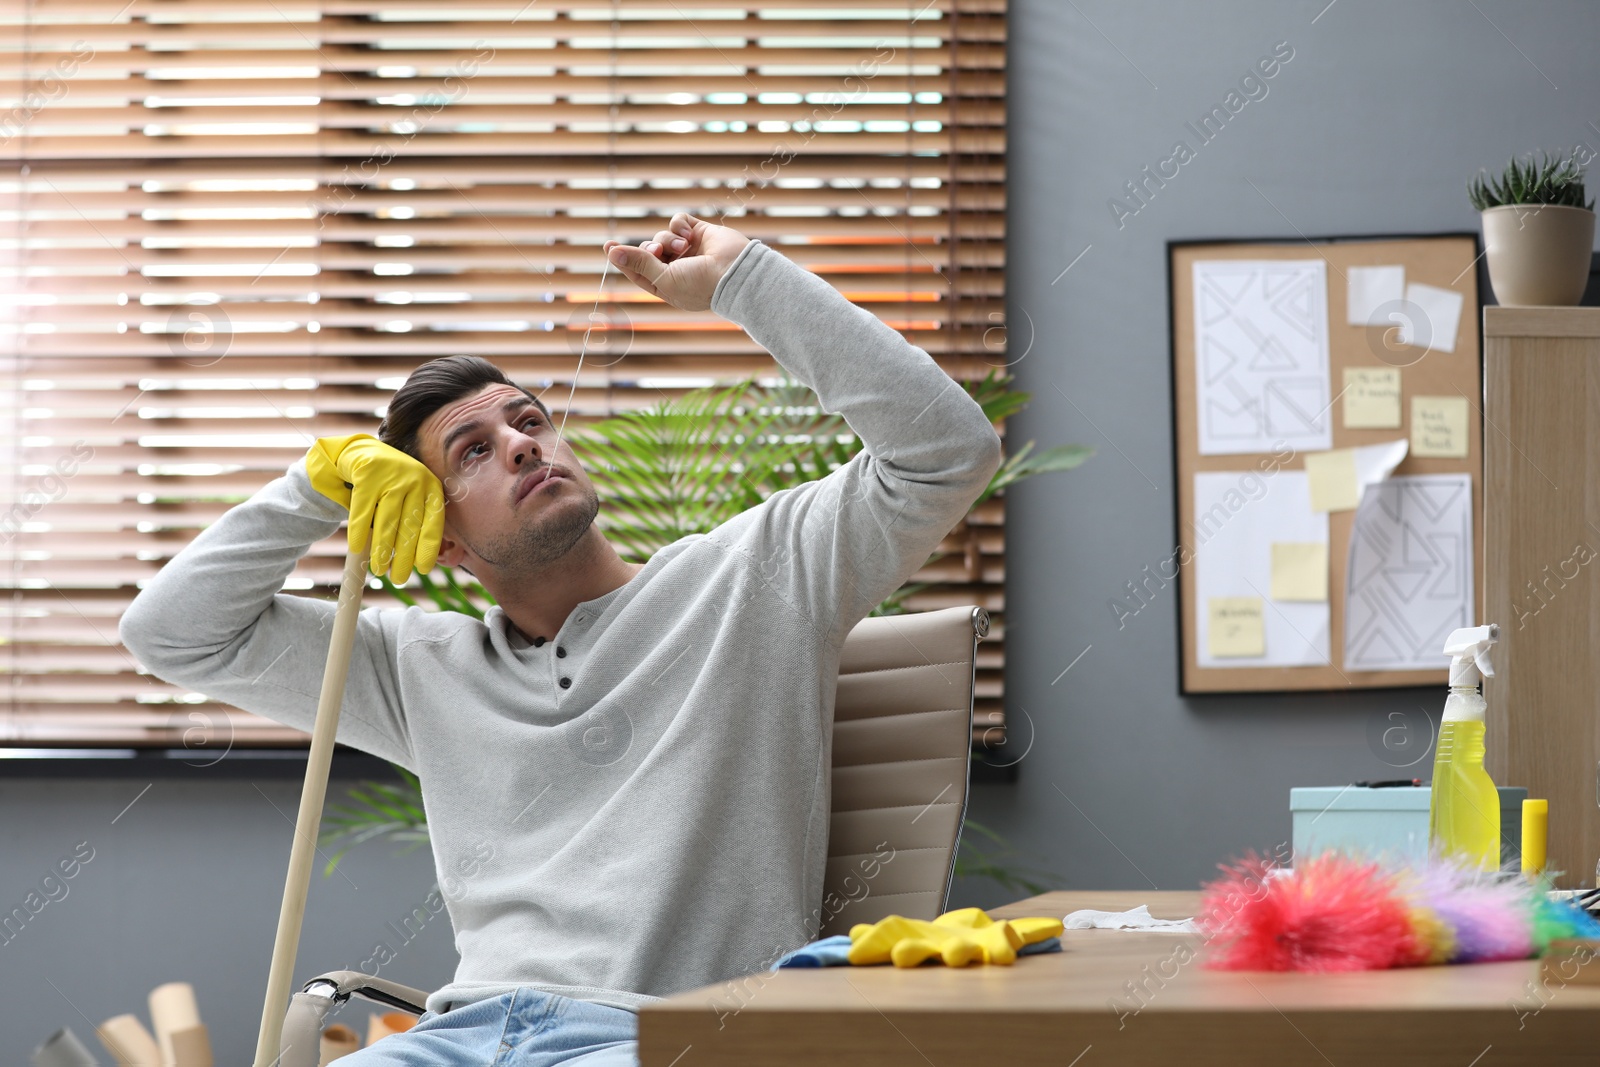 Photo of Lazy man procrastinating while cleaning at home